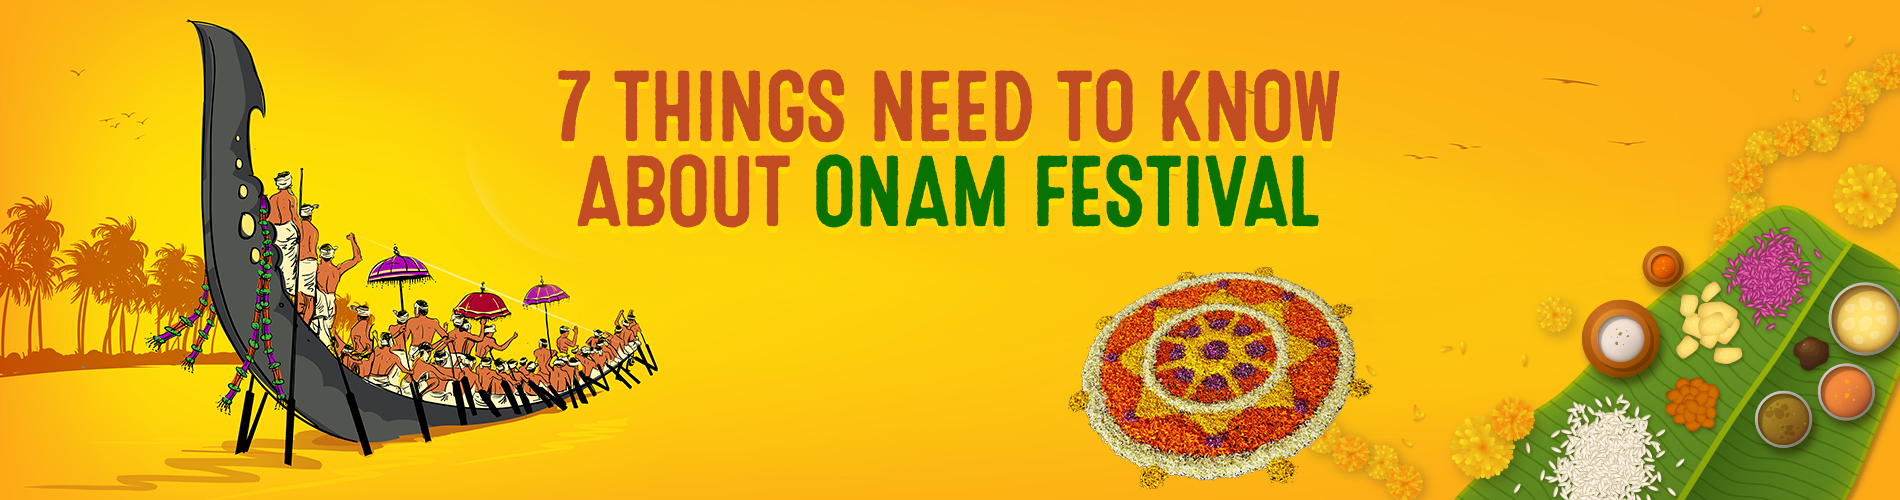 7 Things Need To Know About Onam Festival